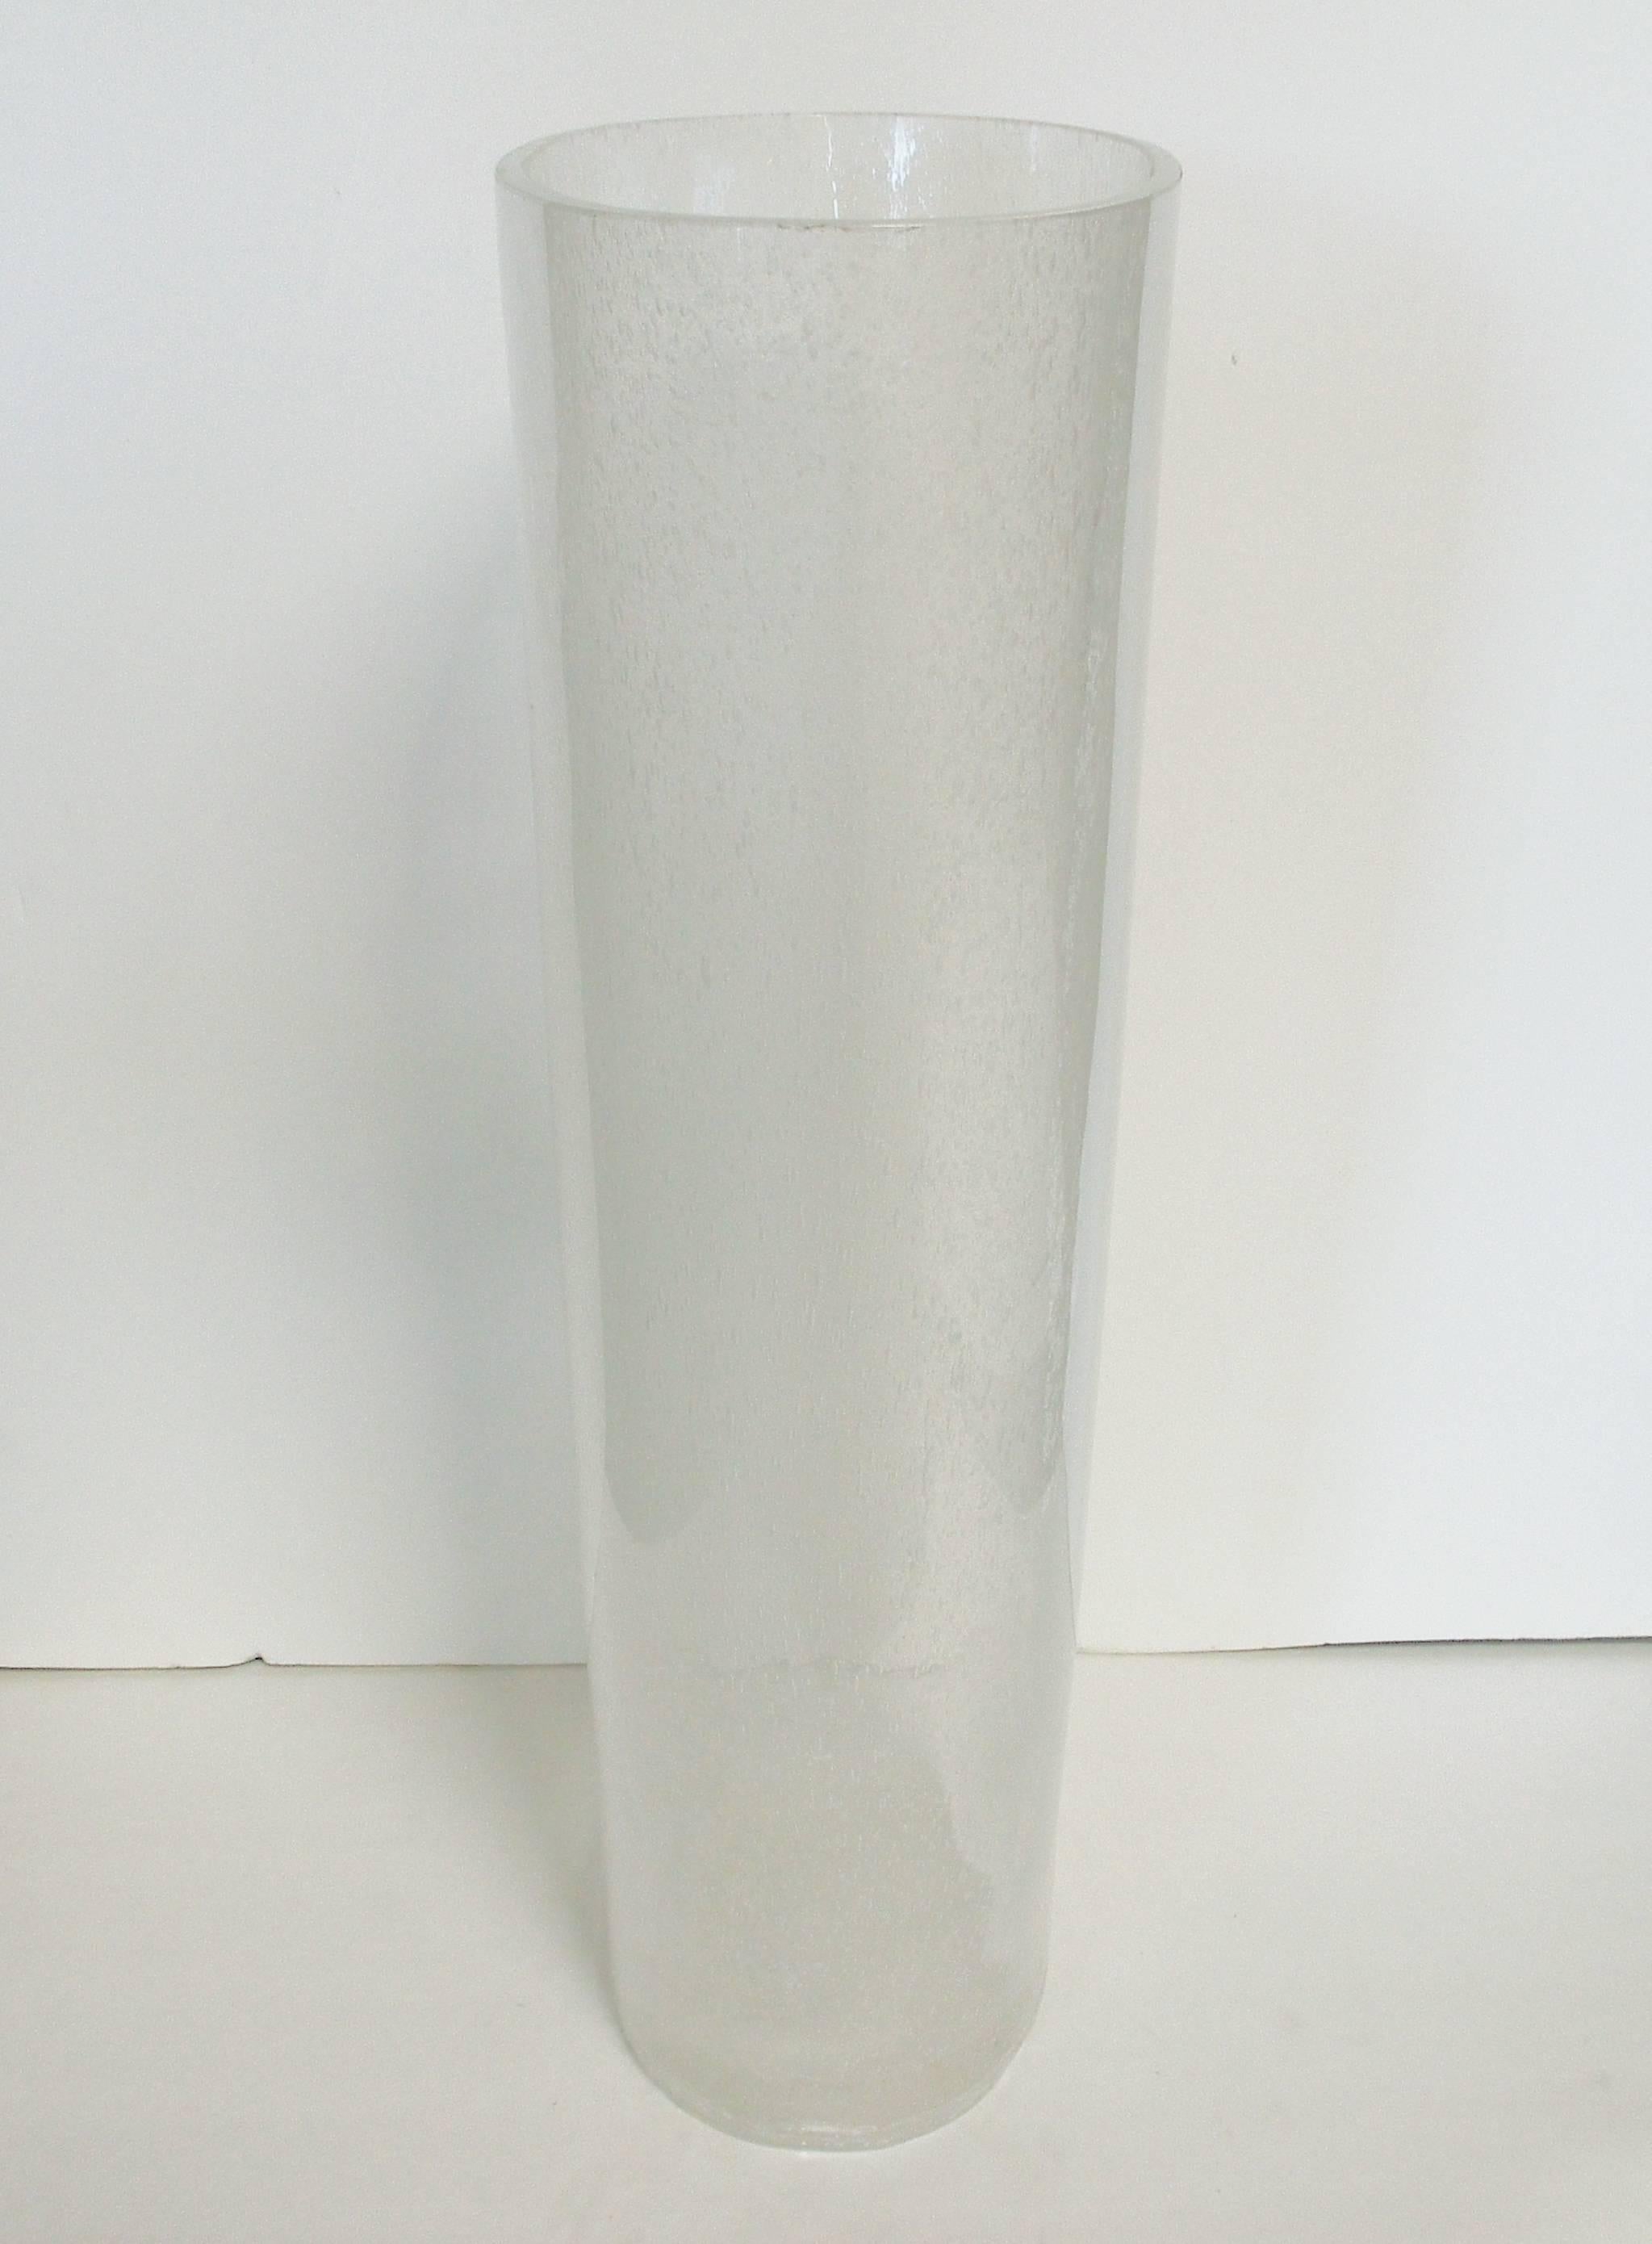 Pair of vintage Italian oversized clear Murano glass vases hand blown in Bollicine technique, bubbles within the glass
Made in Italy in the 1960s
Measures: Height 24.5 inches, depth 7.5 inches, width 11.5 inches
Pair in stock in Palm Springs